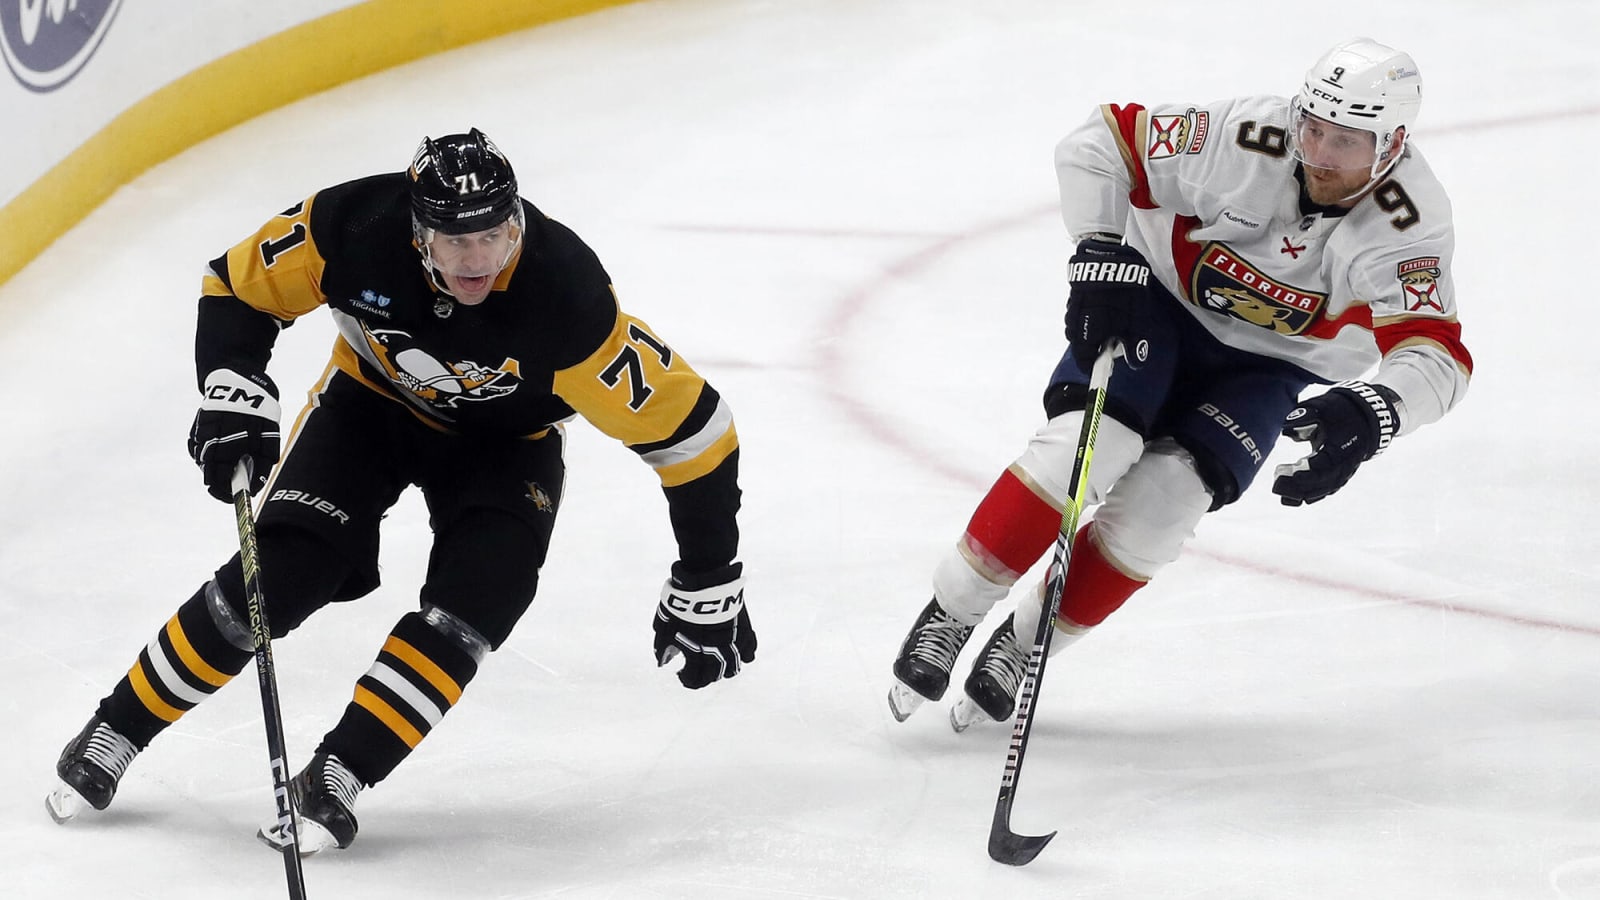 Malkin bails out 1-for-8 power play, secures point before shootout loss